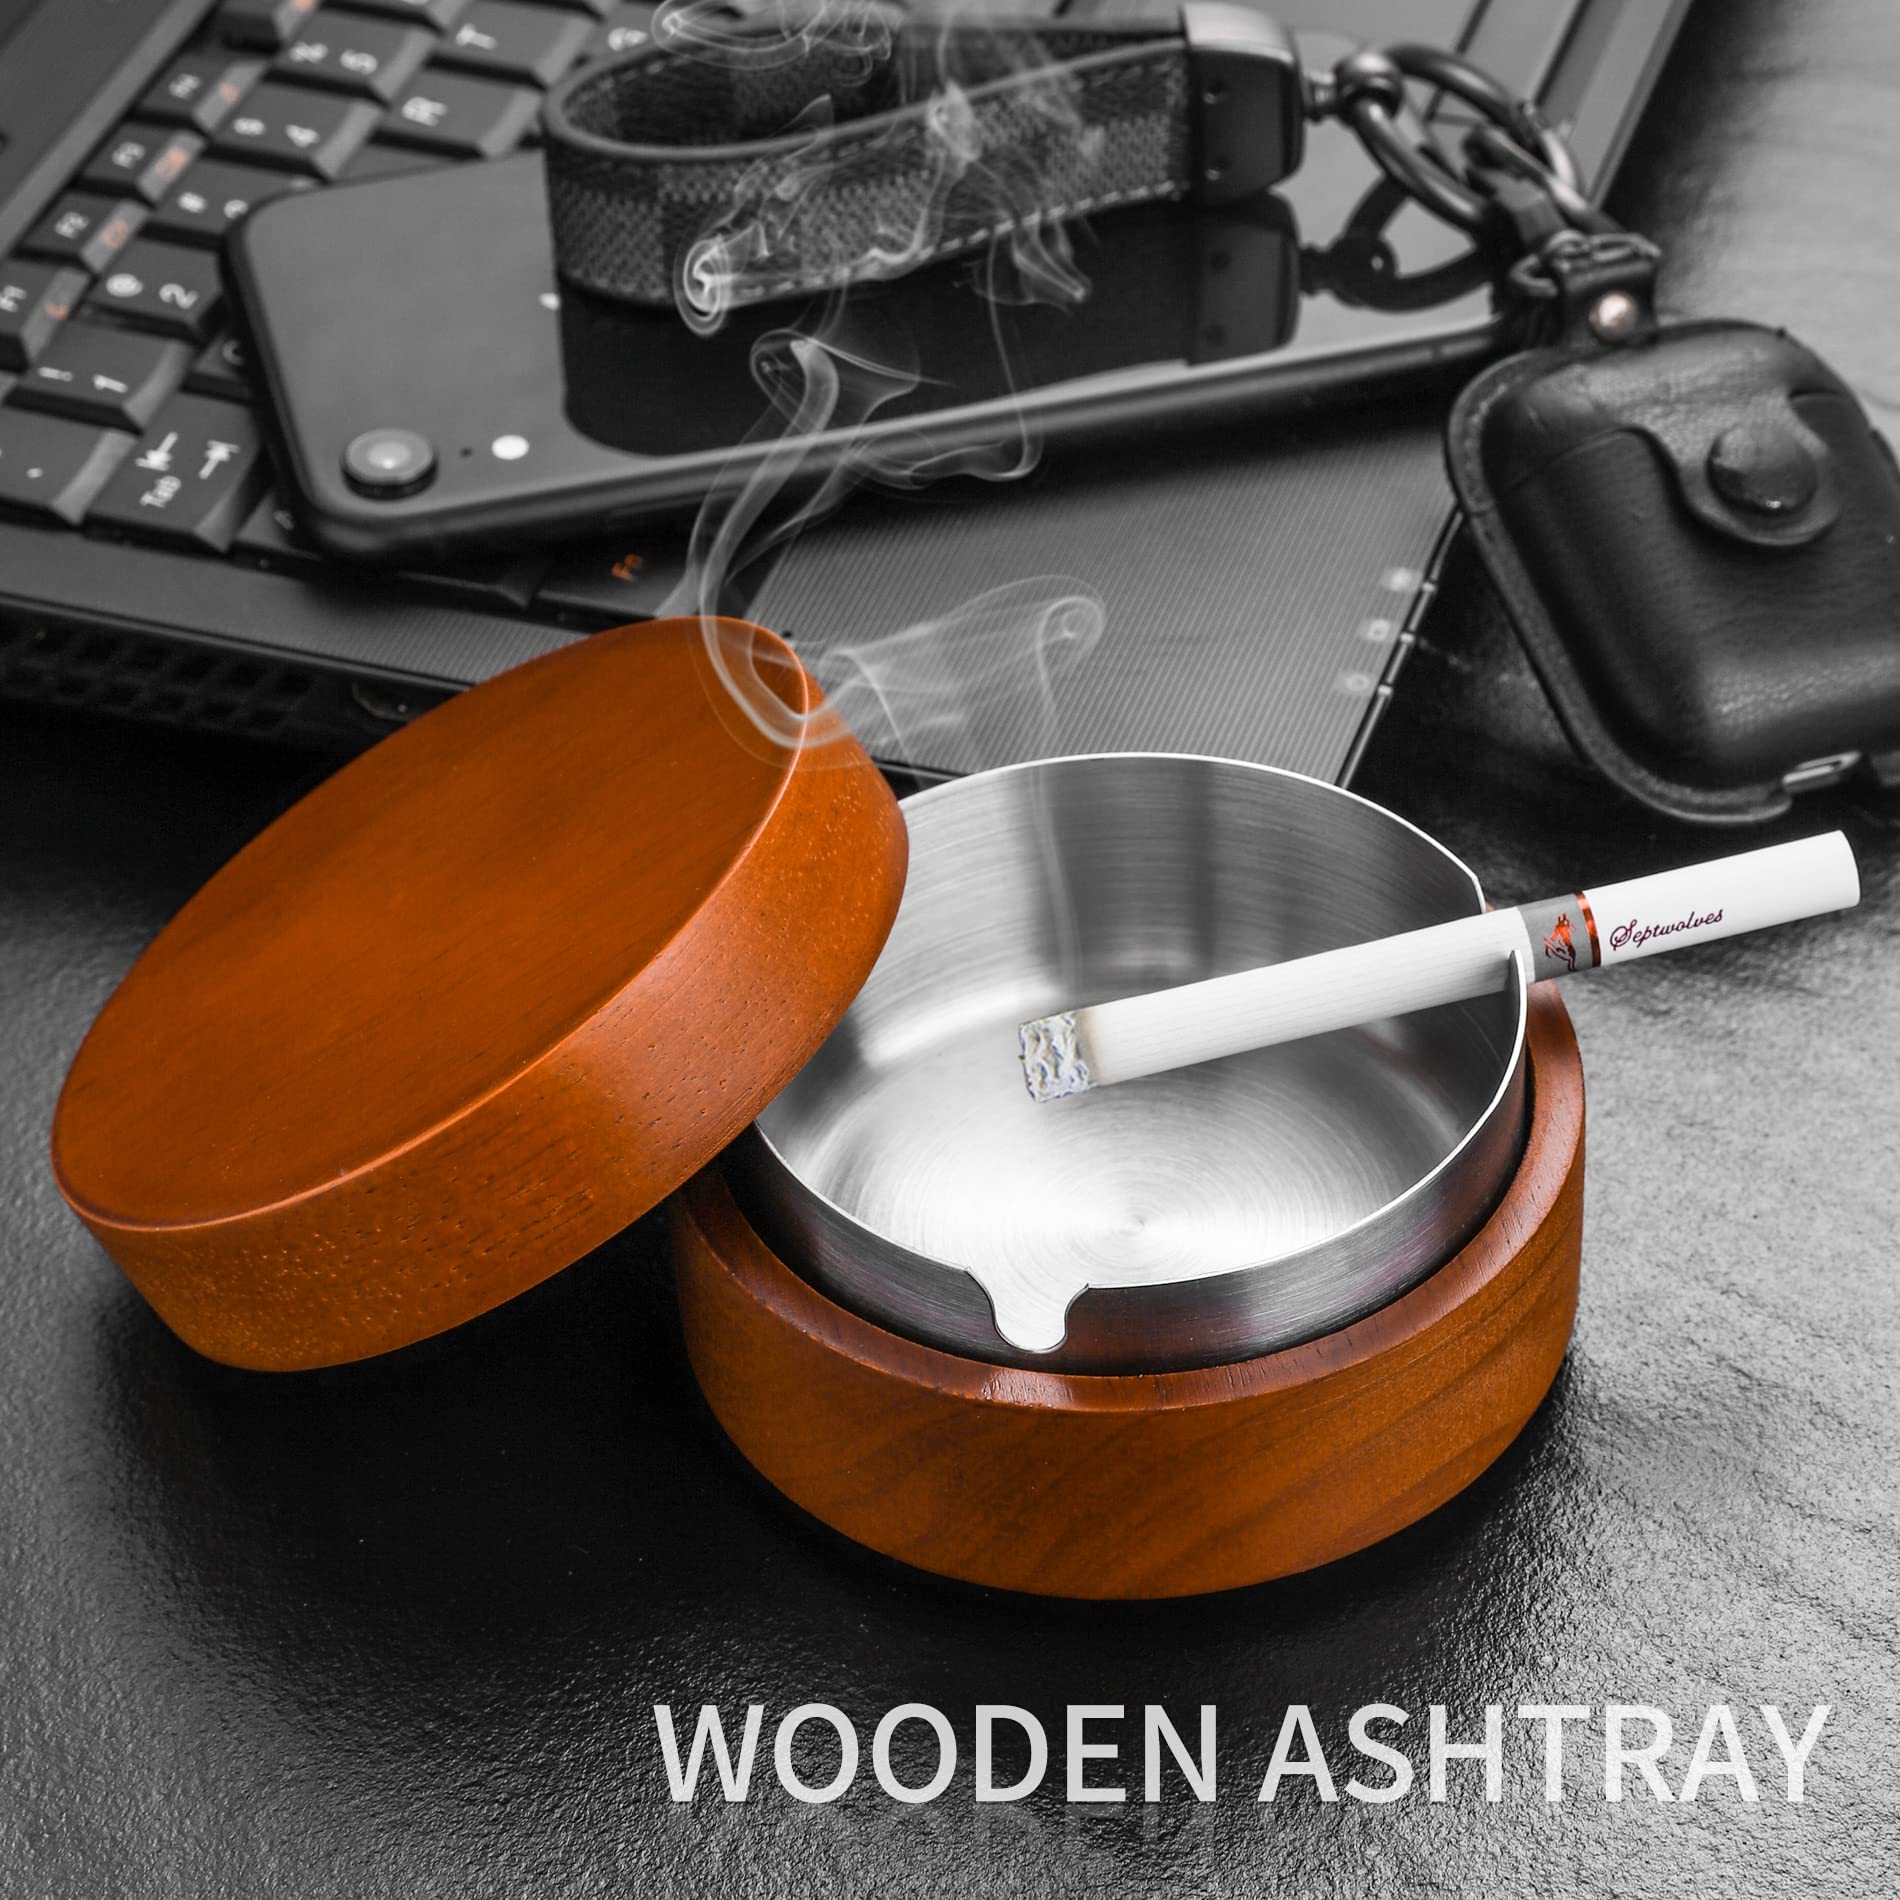 Wooden Ashtray with Lid for Smokers Stainless Steel Liner Ash Tray Windproof Durable Easy to Clean Cool Ashtrays for Indoor or Outdoor Use, Patio, Office & Home (Red)